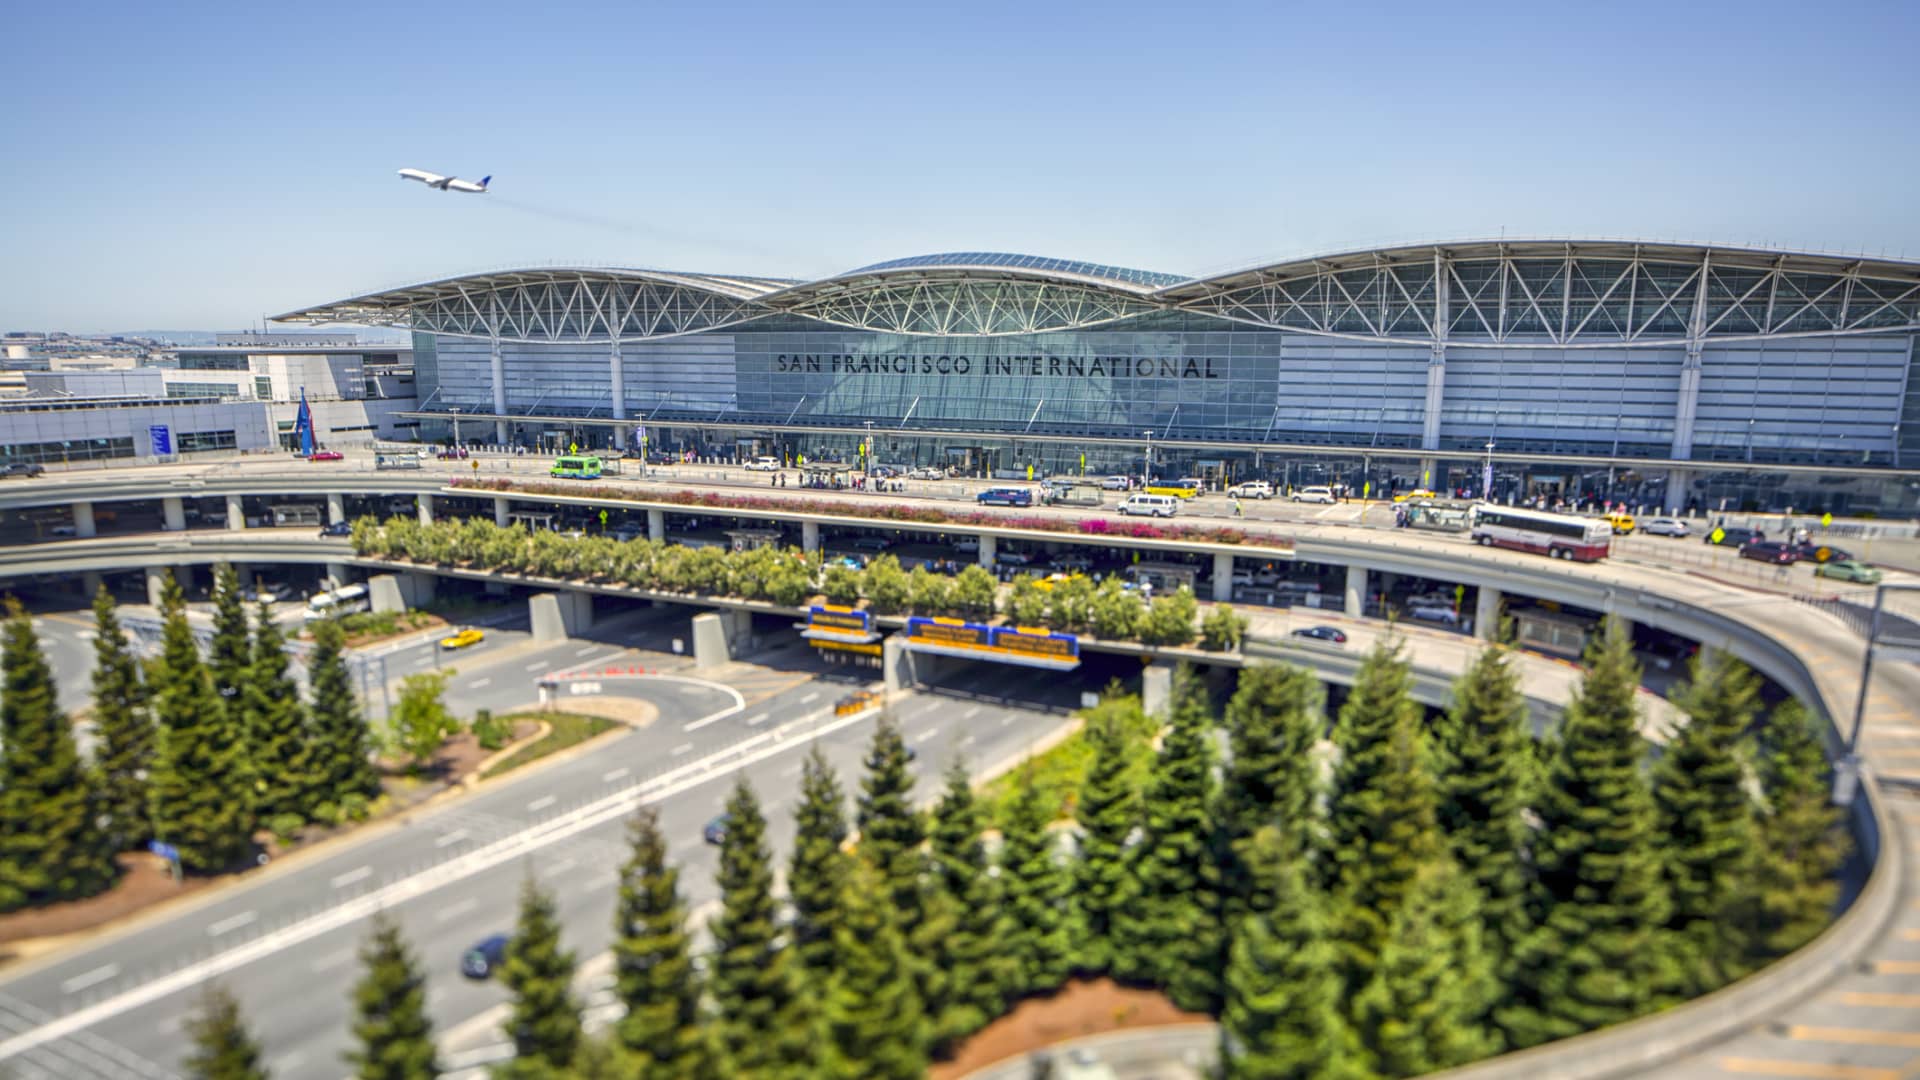 The San Francisco International Airport ranked as the worst airport in America, according to AirHelp.